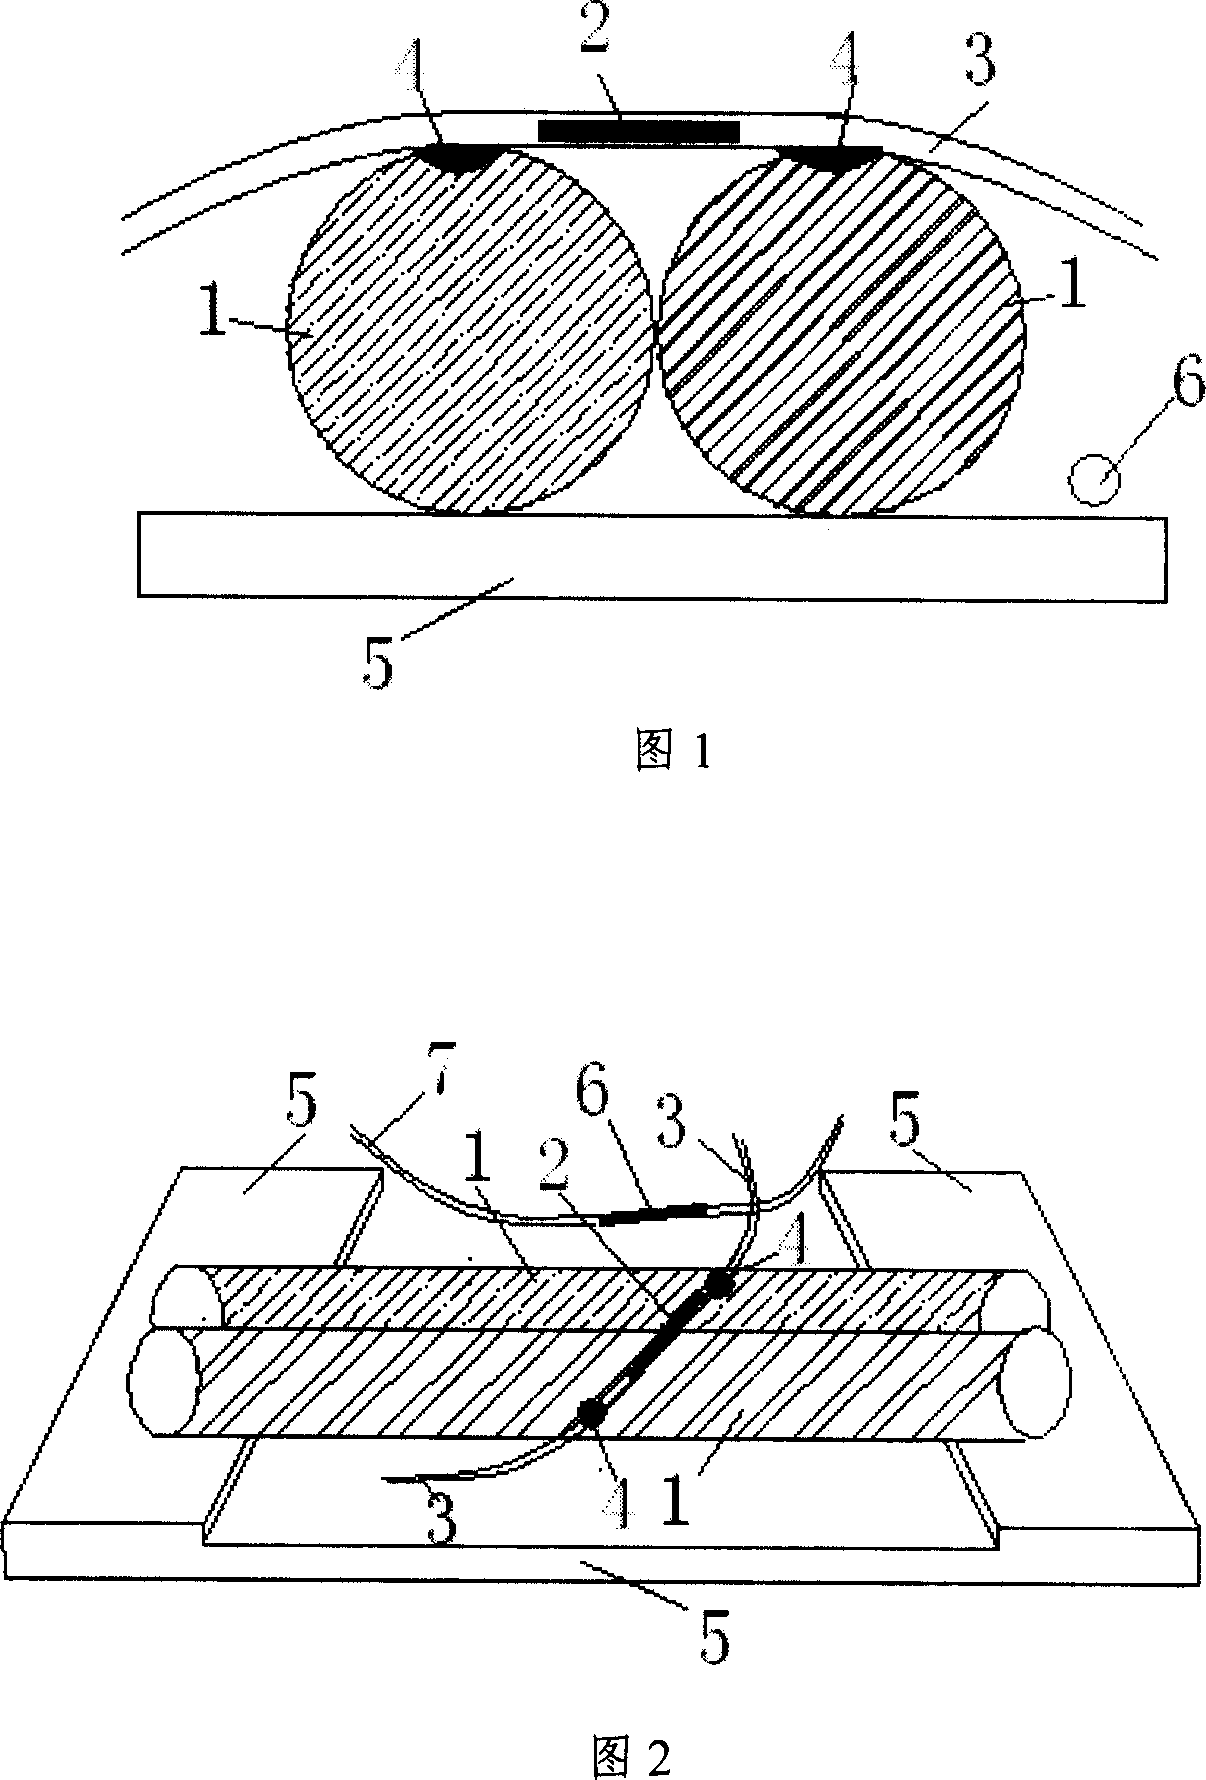 Method for testing steel corrosion of reinforced concrete members